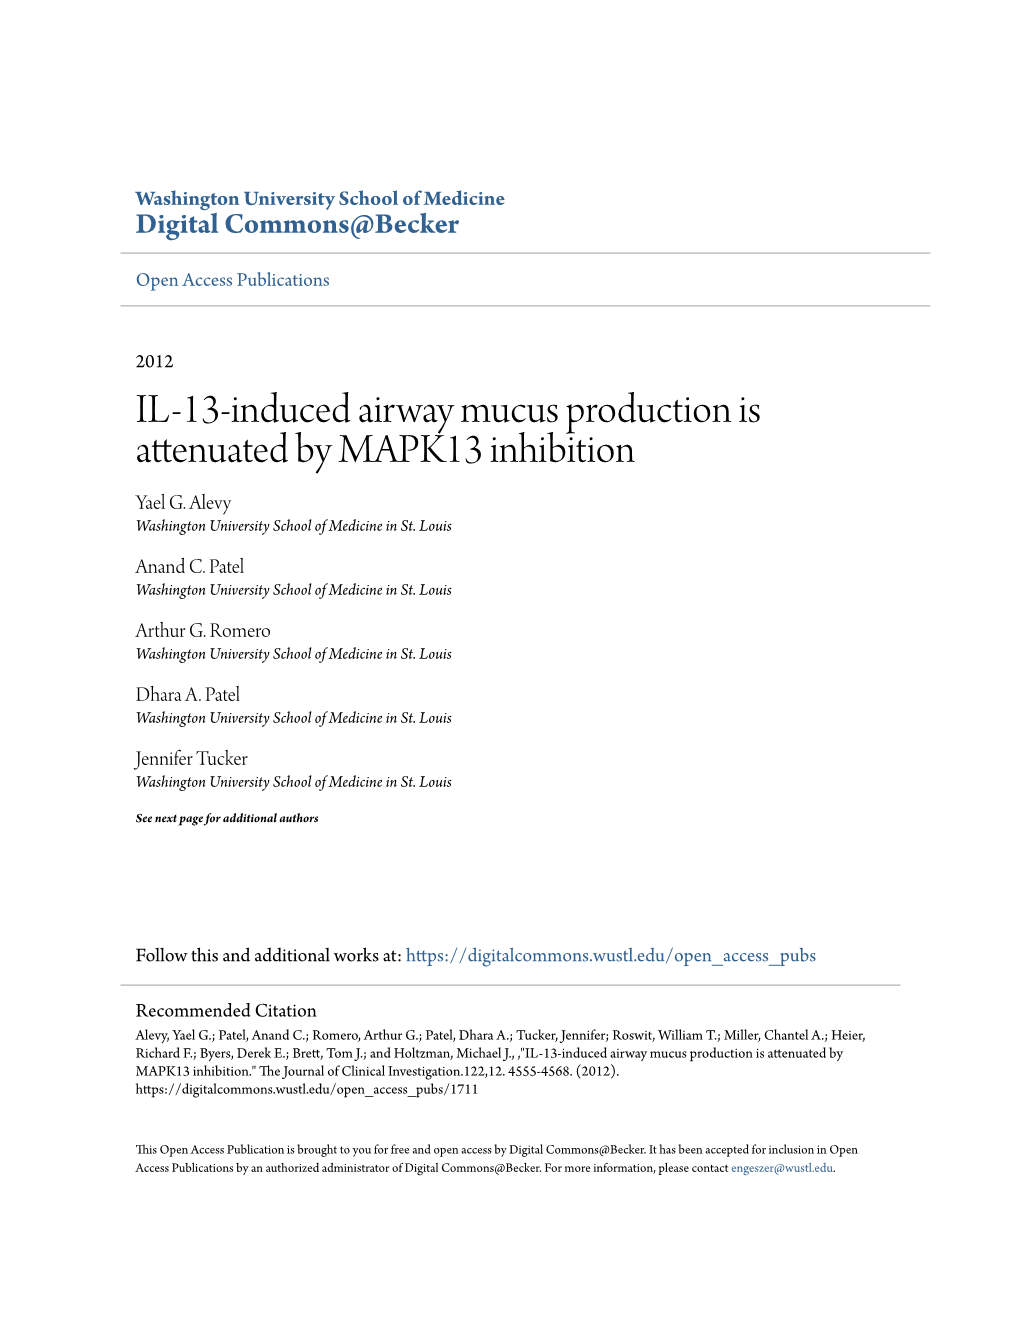 IL-13-Induced Airway Mucus Production Is Attenuated by MAPK13 Inhibition Yael G